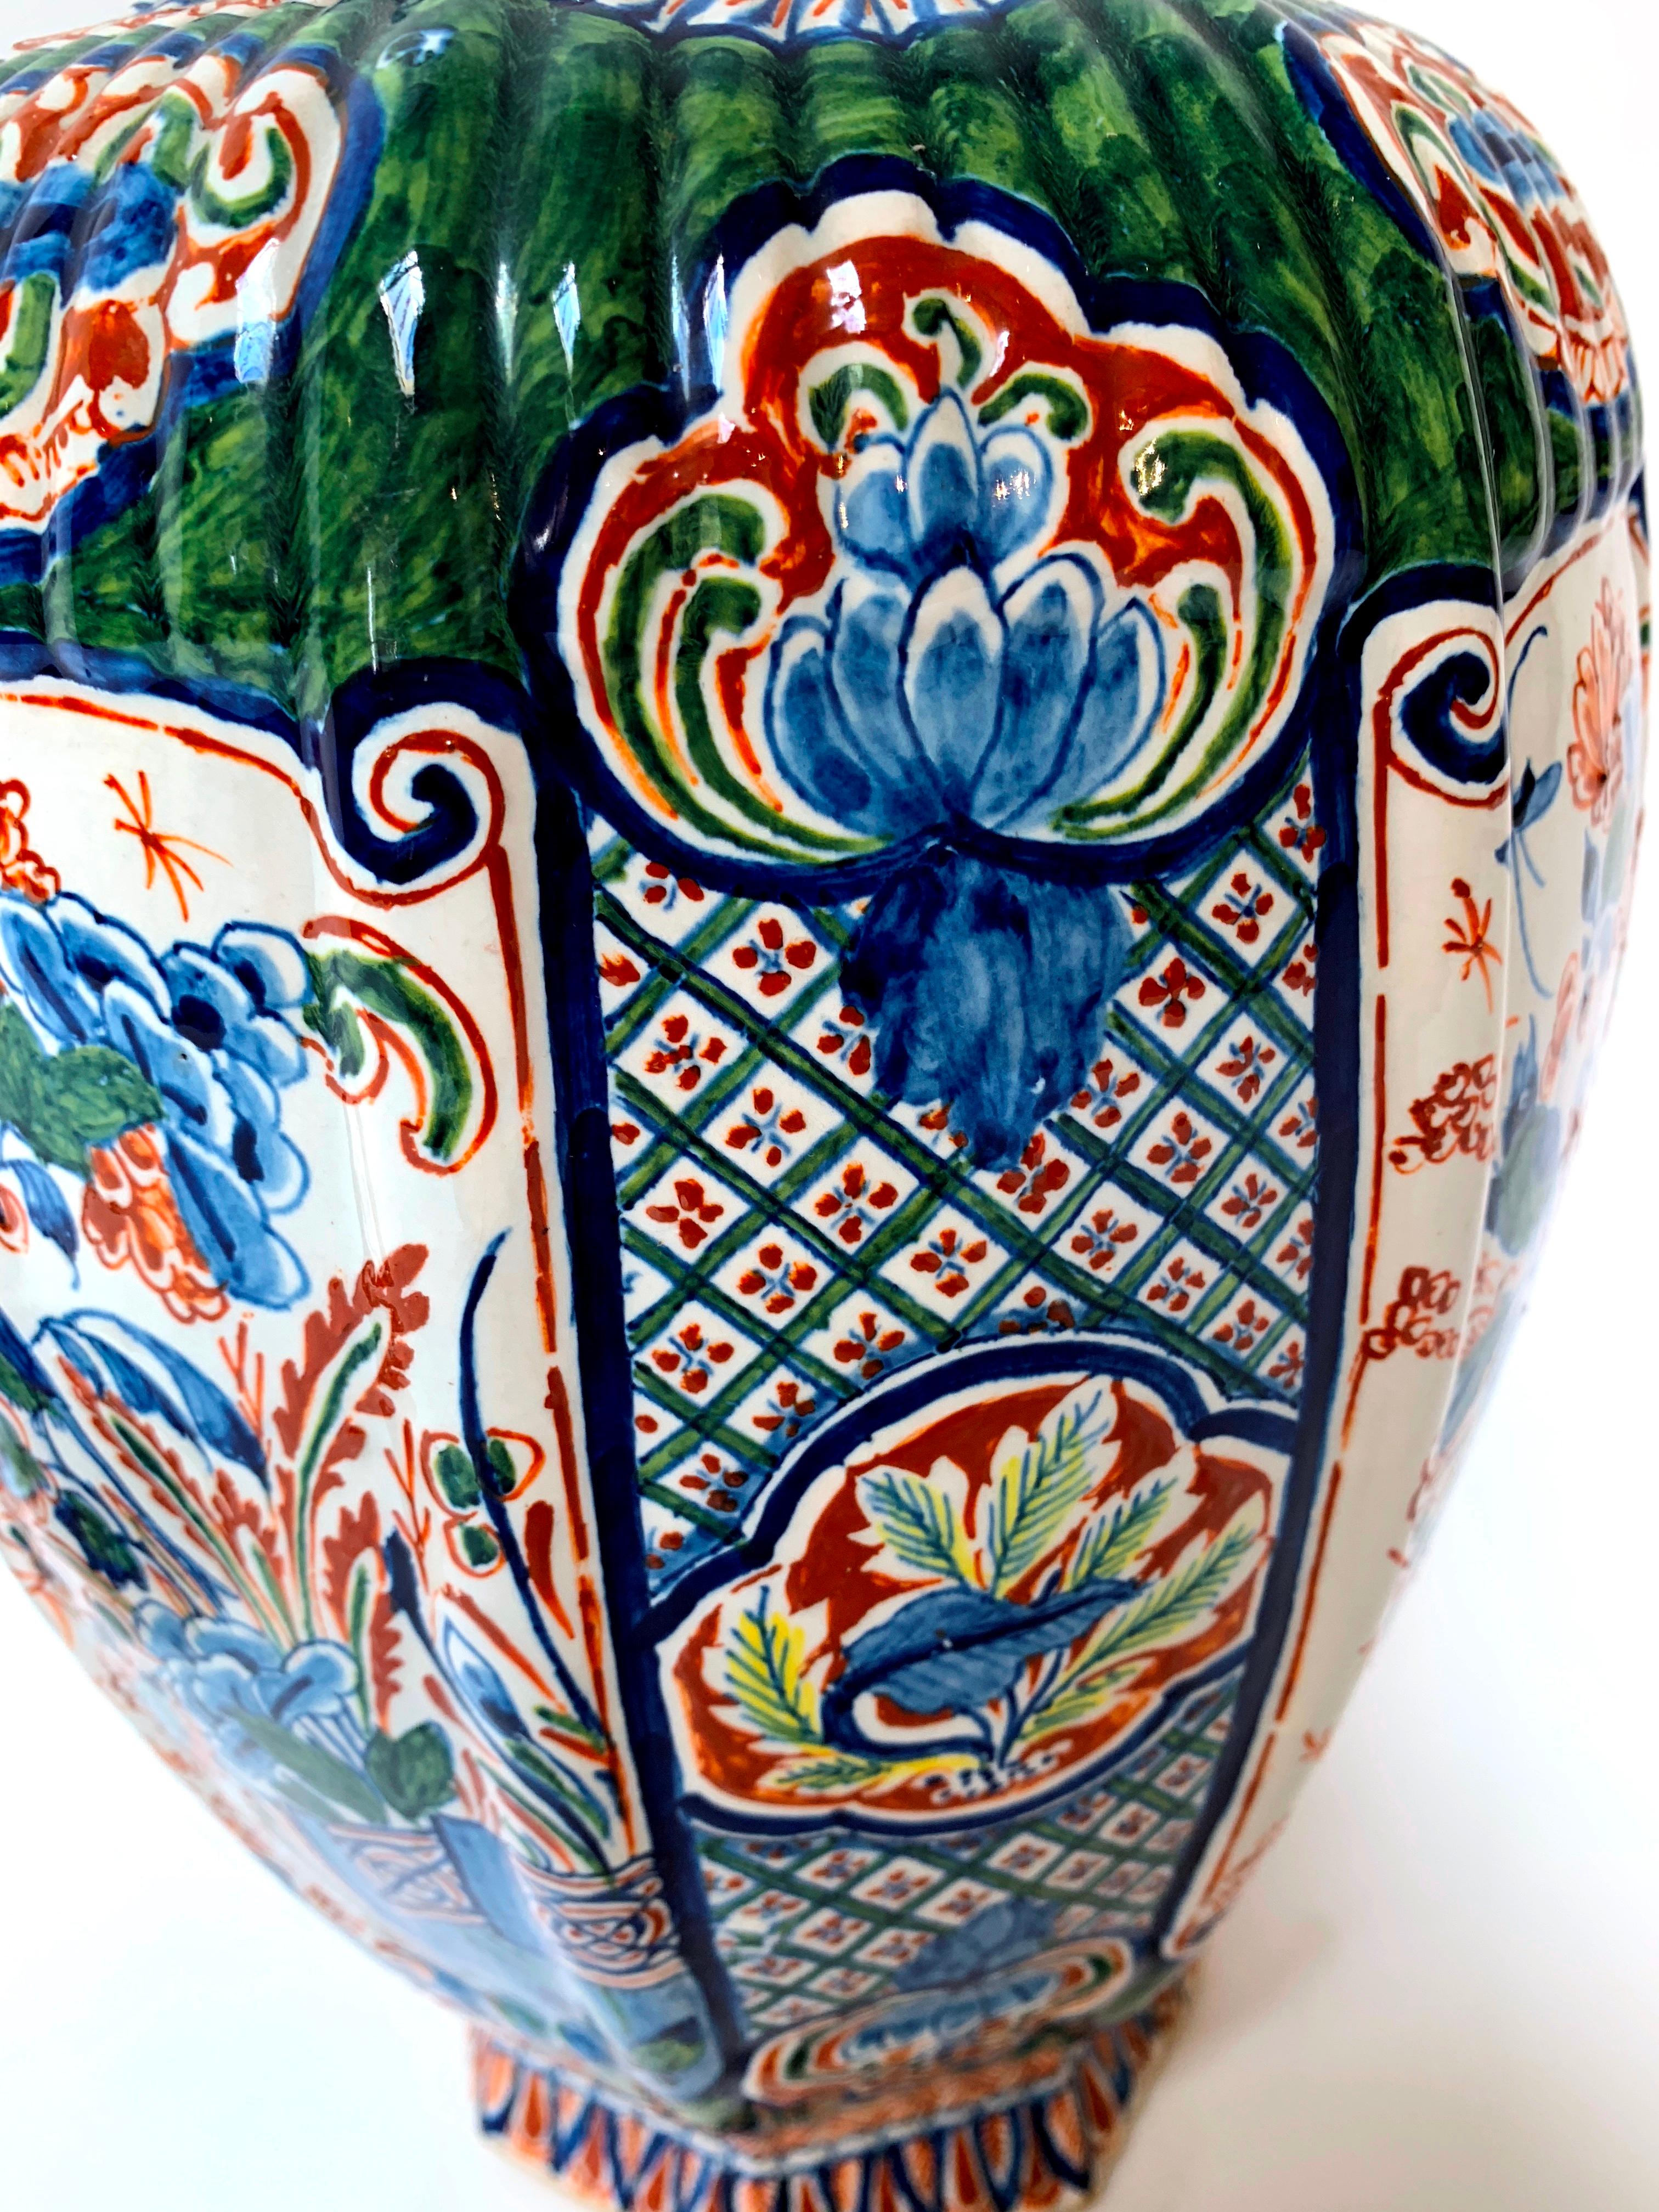 Dutch 19th Century Delftware Polychrome Enameled Vase and Cover